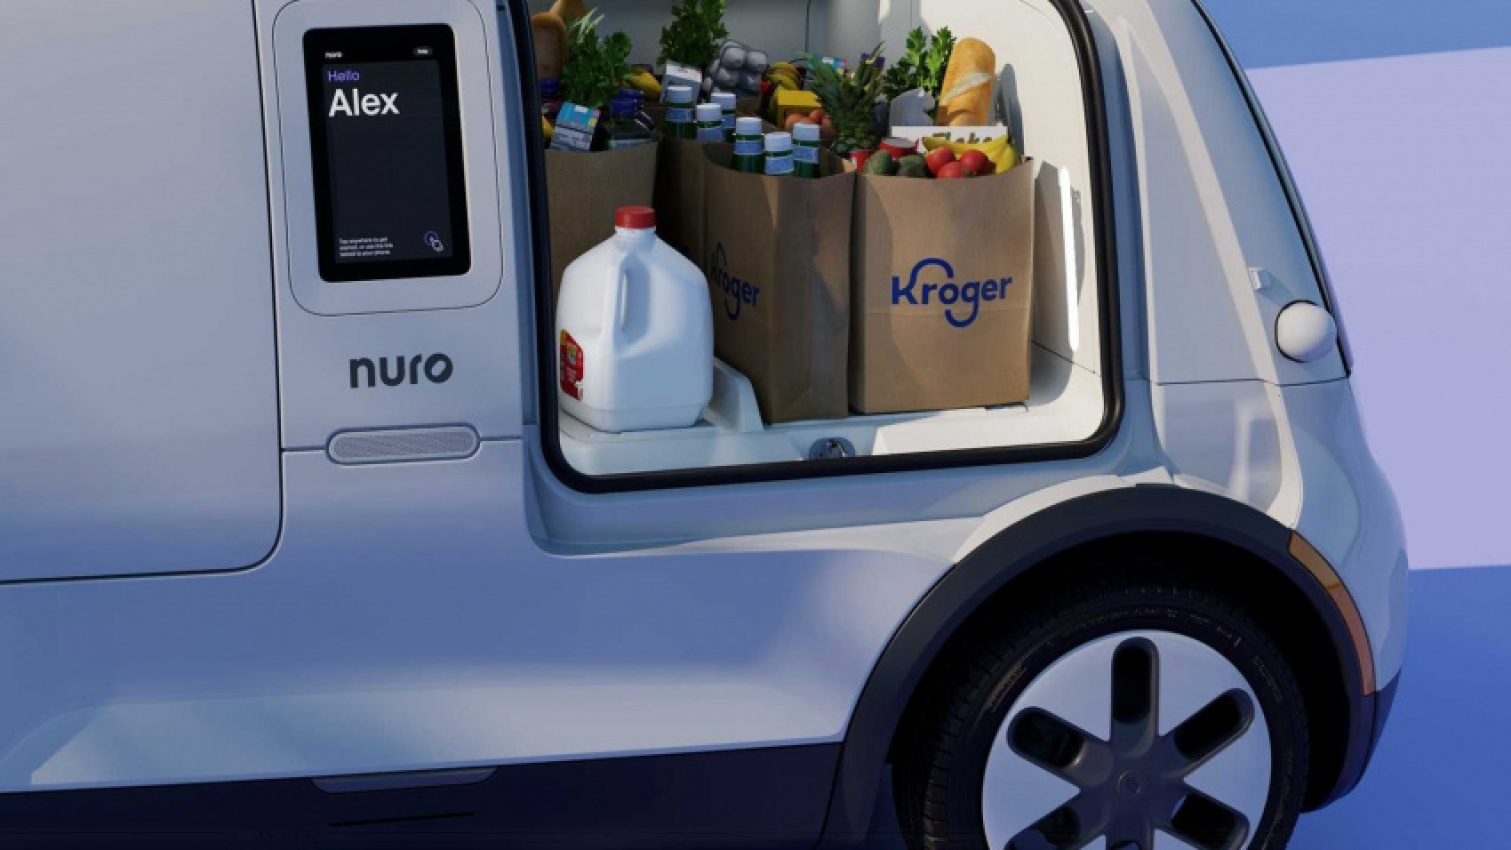 autos, cars, automotive industry, car, cars, driven, driven nz, electric cars, motoring, new zealand, news, nz, self driving cars, tech, technology, this self-driving delivery vehicle has airbags on outside, this self-driving delivery vehicle has airbags on the outside